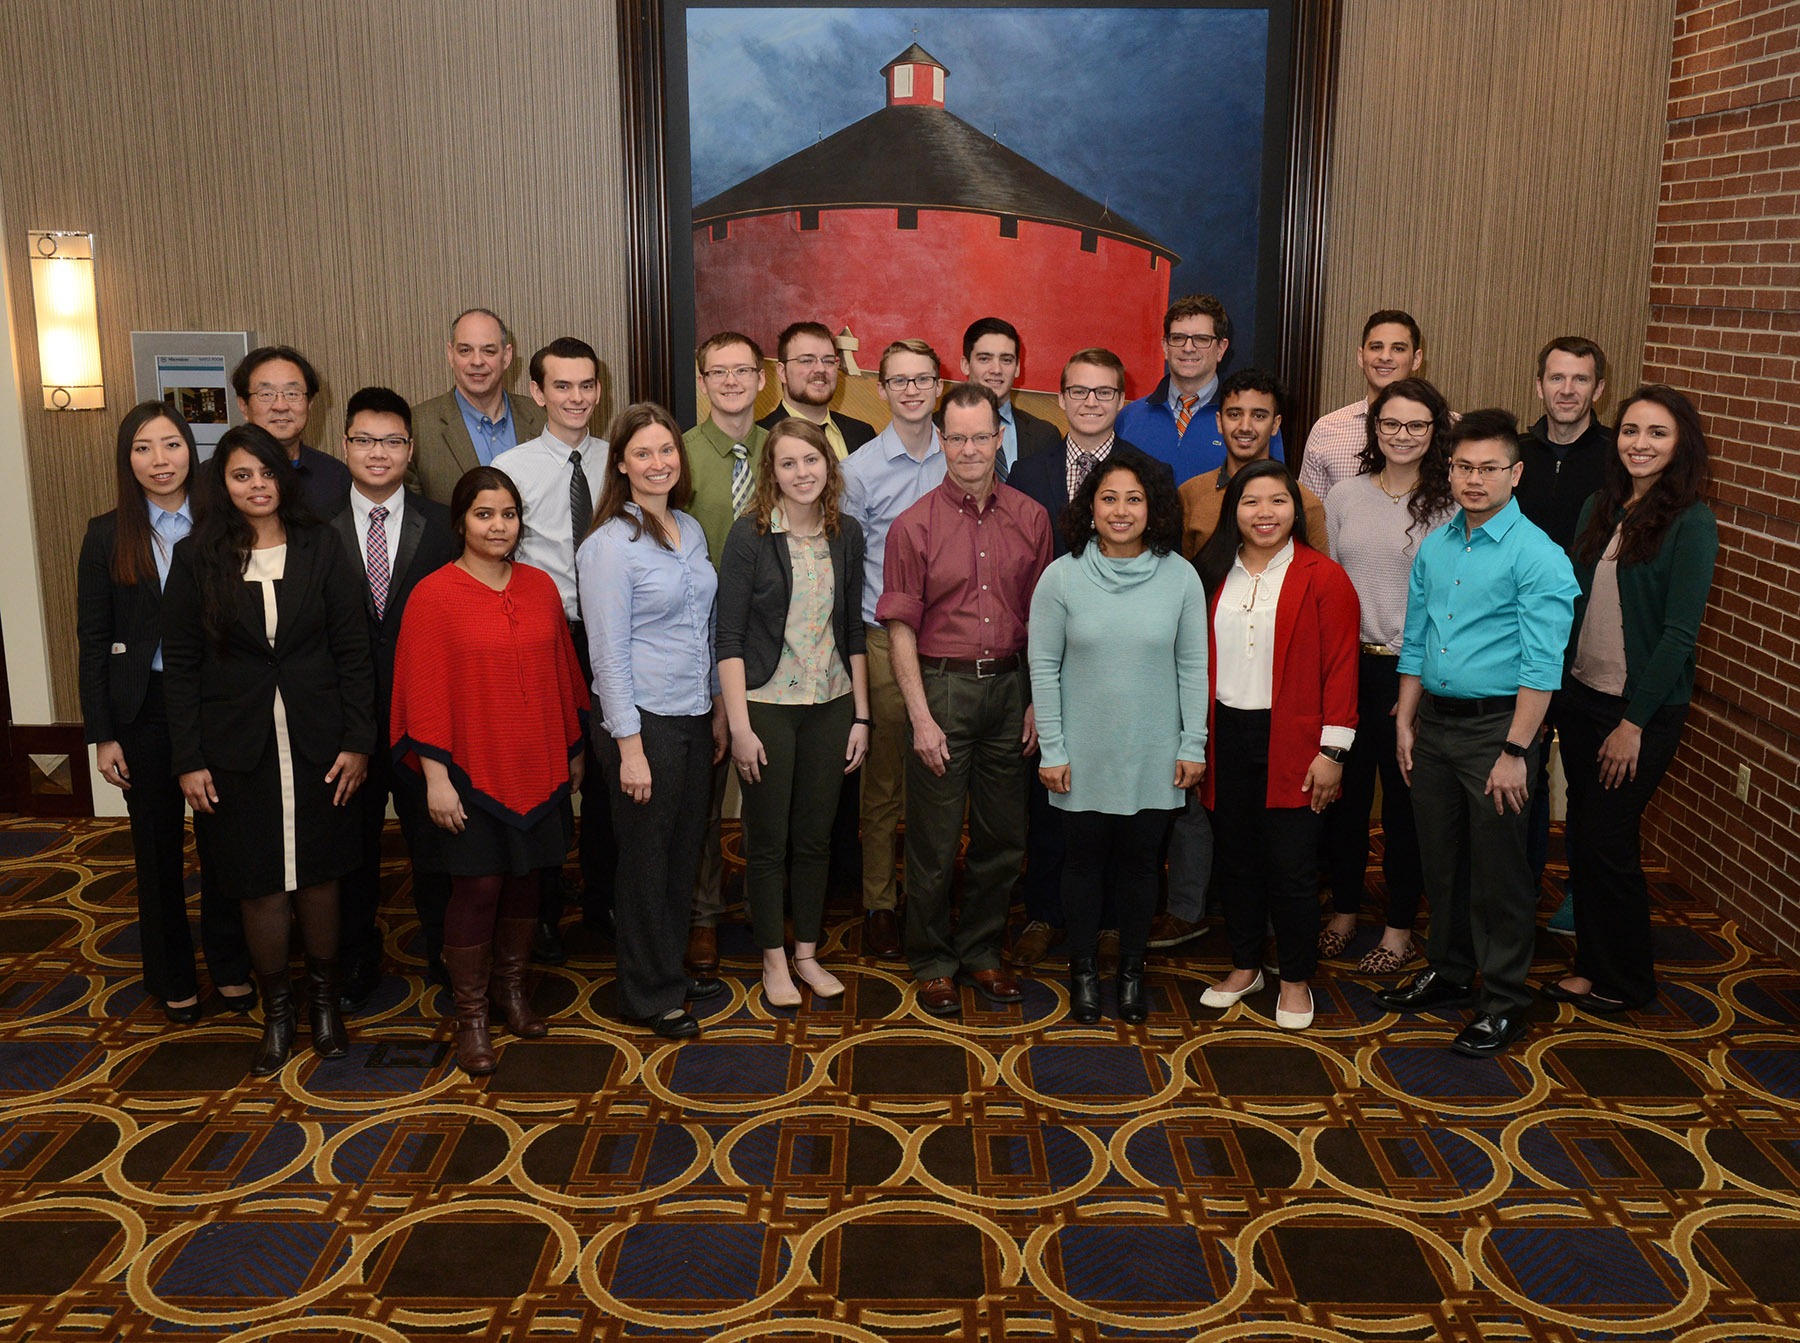 Wichita State student scholars and faculty attendees/presenters at the 16th Annual K-INBRE Symposium, January 13-14, in Overland Park, Kansas.